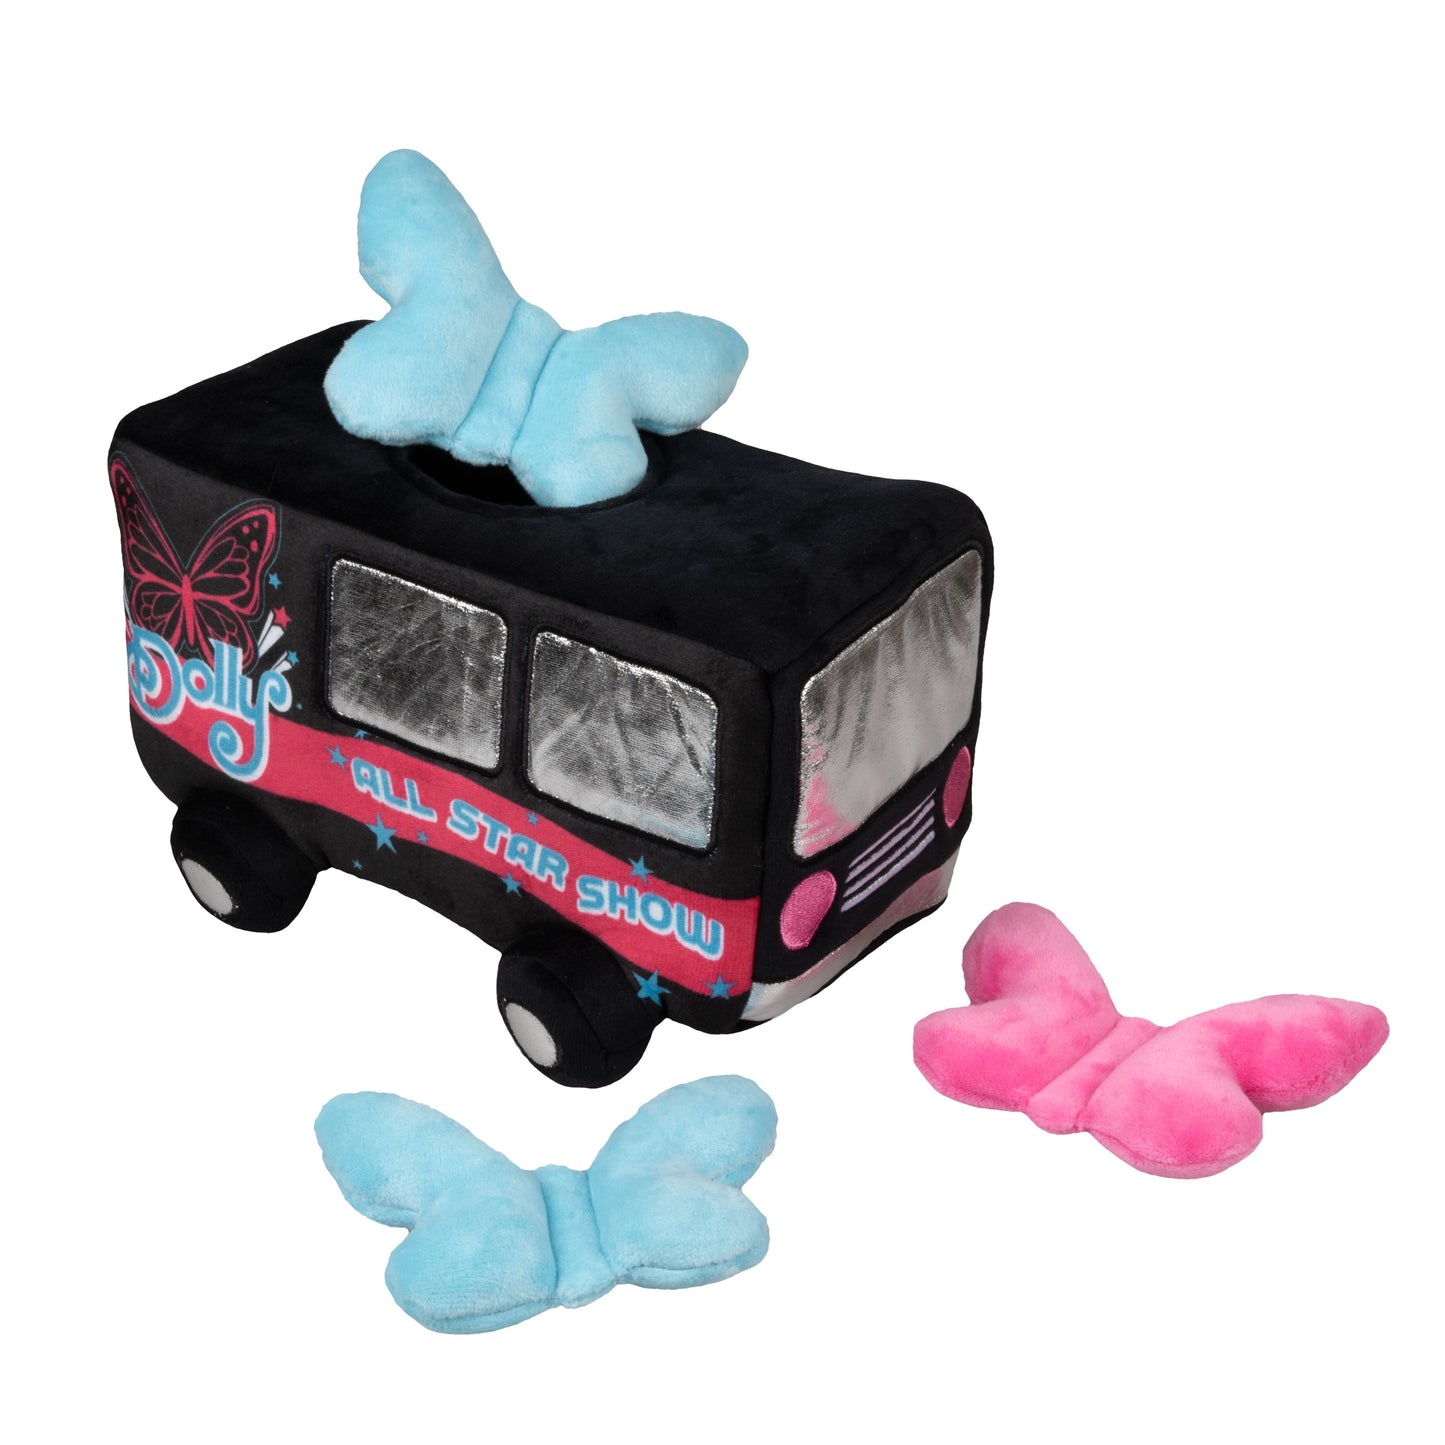 Dolly Tour Bus Hideaway Interactive Dog Toy